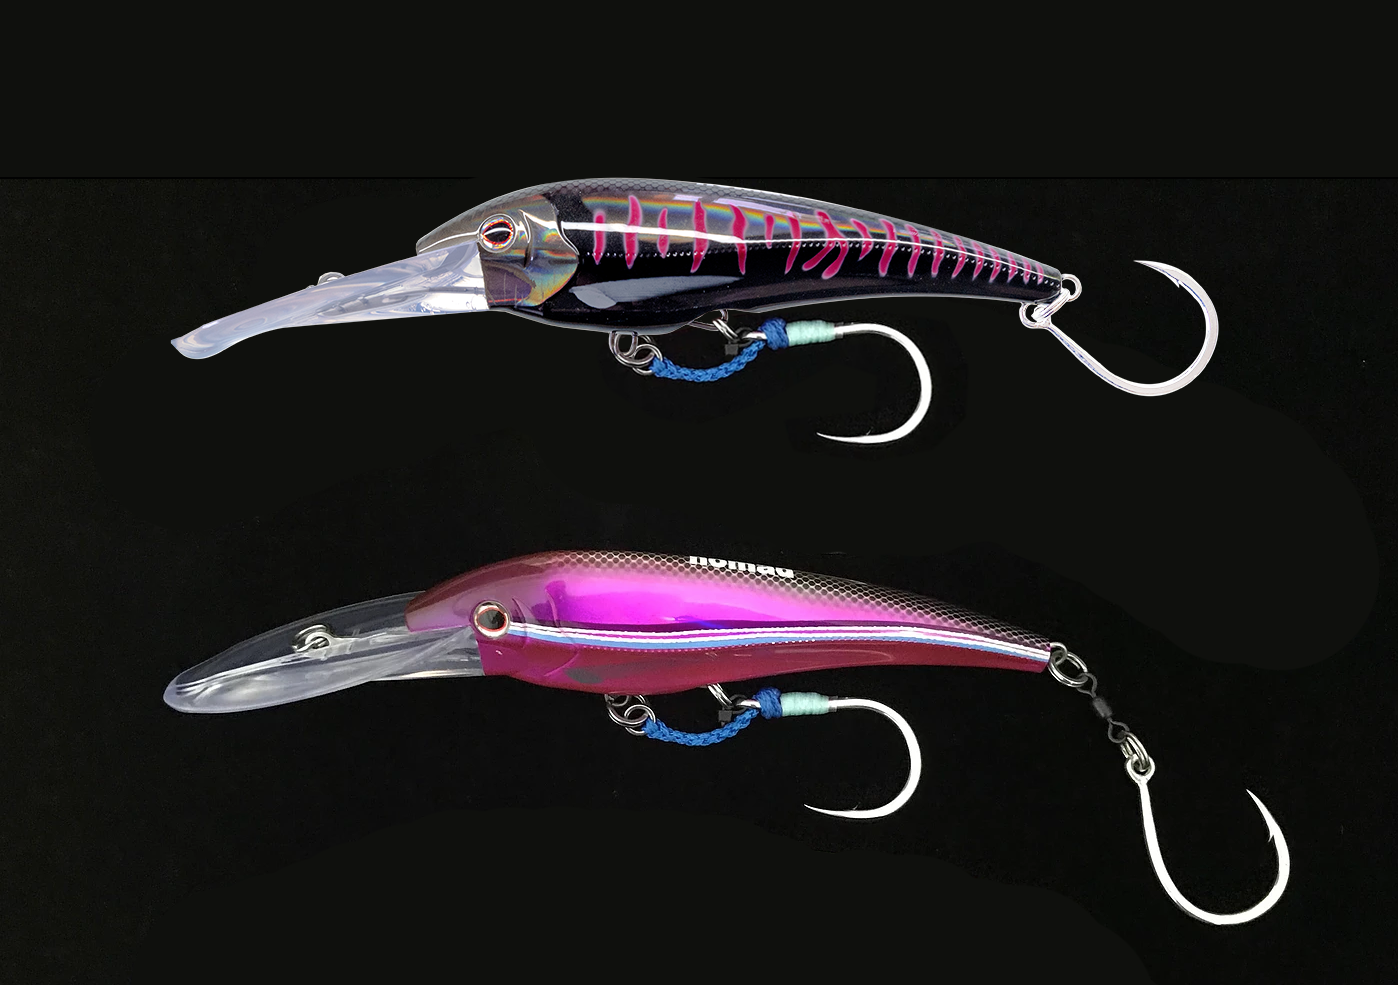 How to set an Offshore Trolling Spread of Nomad DTX Minnows and